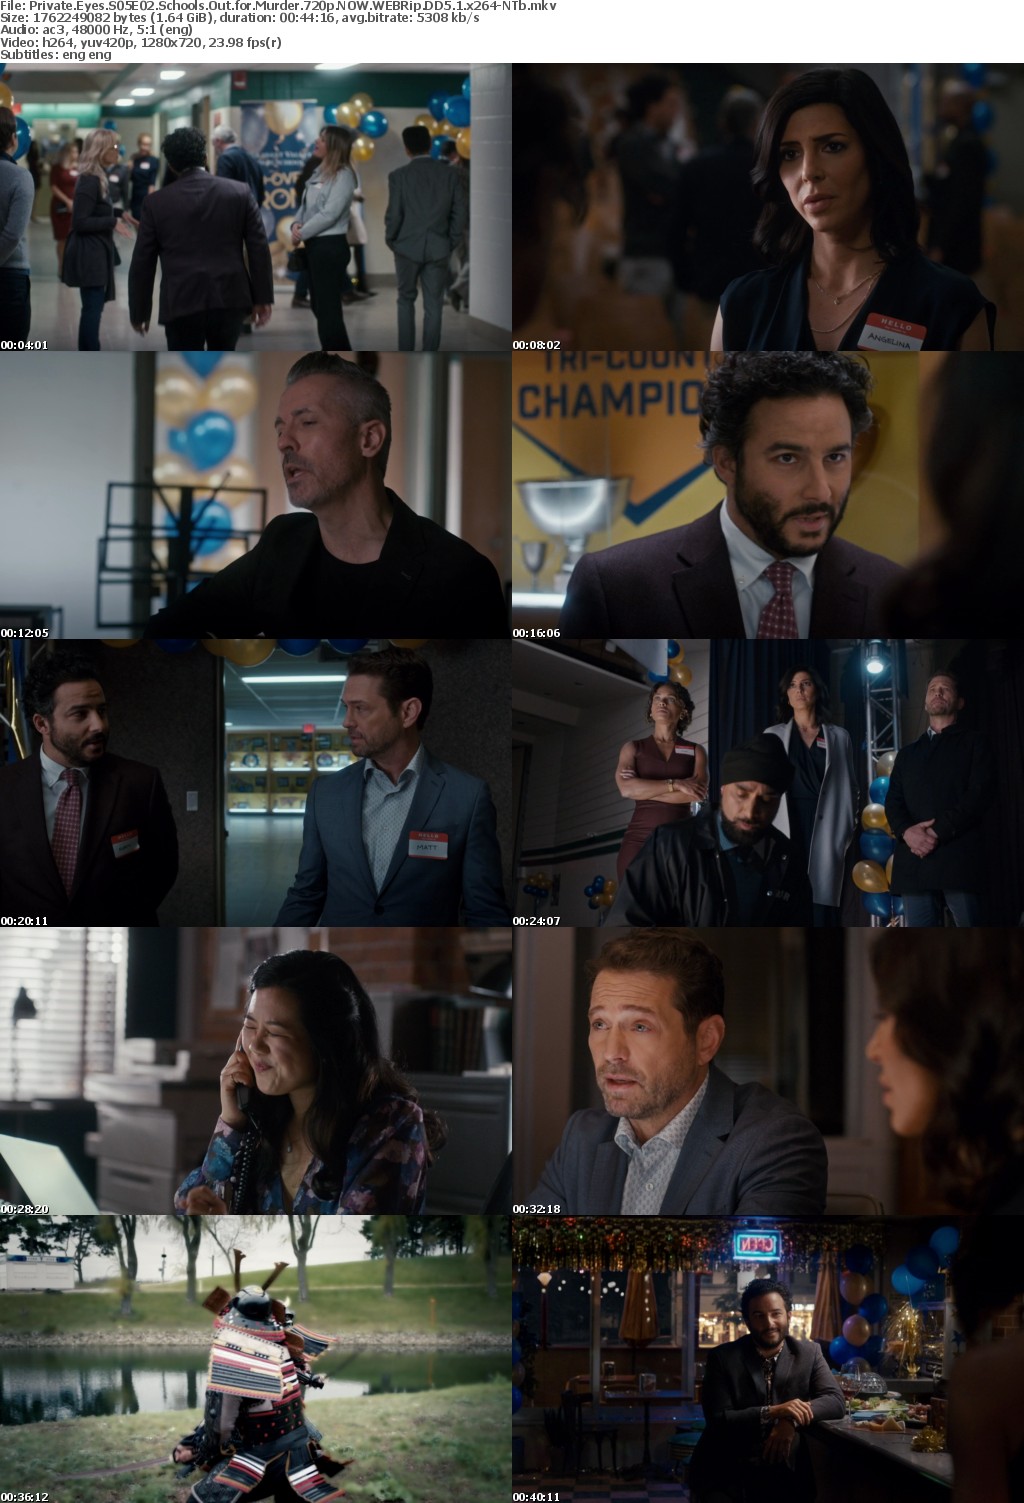 Private Eyes S05E02 Schools Out for Murder 720p NOW WEBRip DD5 1 x264-NTb